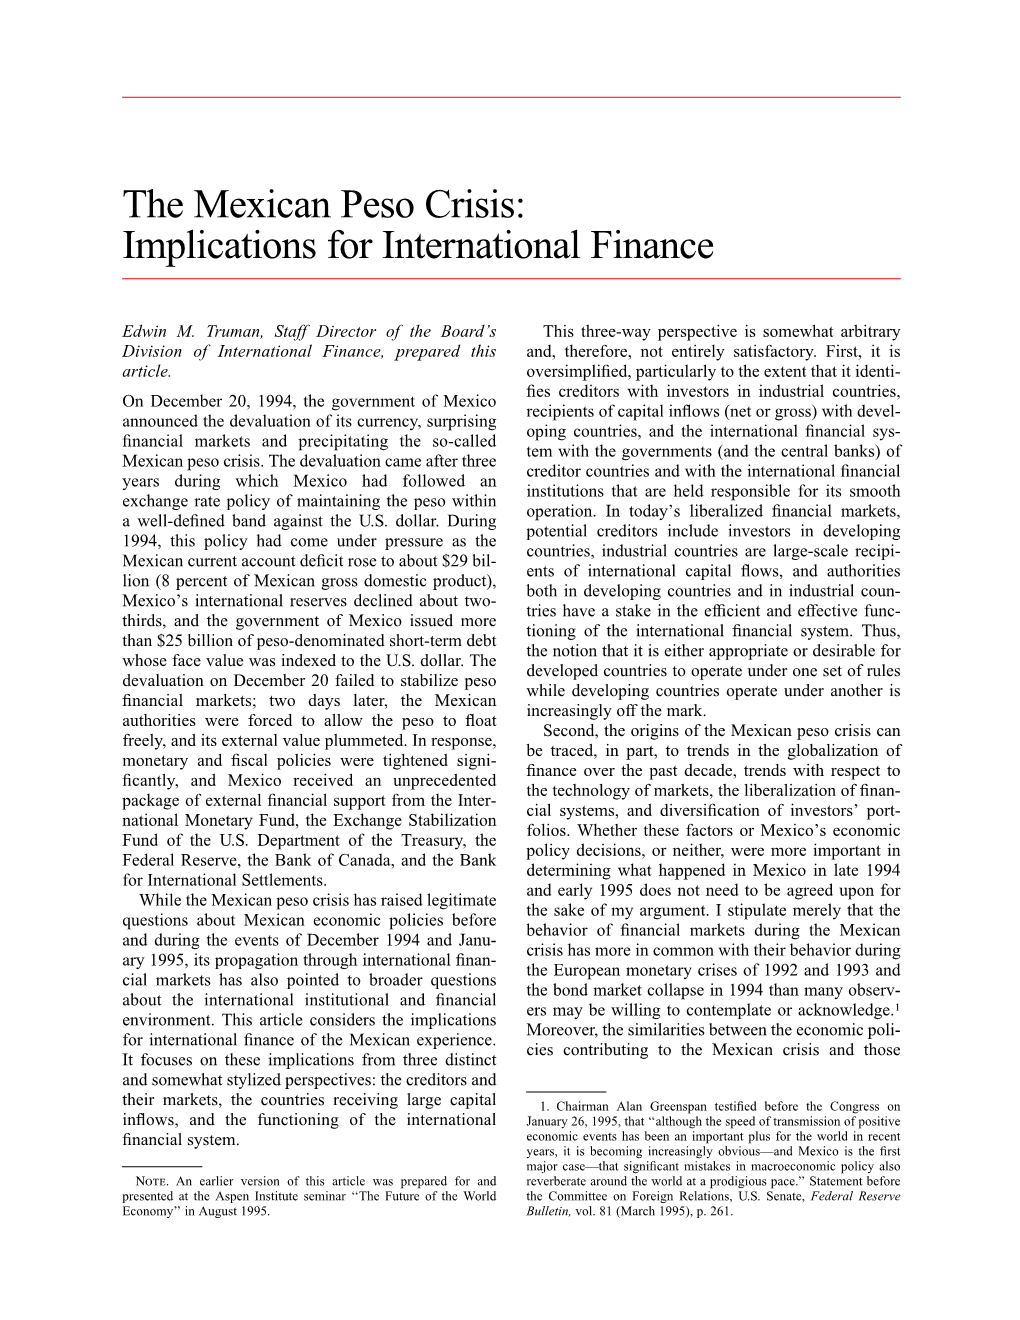 The Mexican Peso Crisis: Implications for International Finance